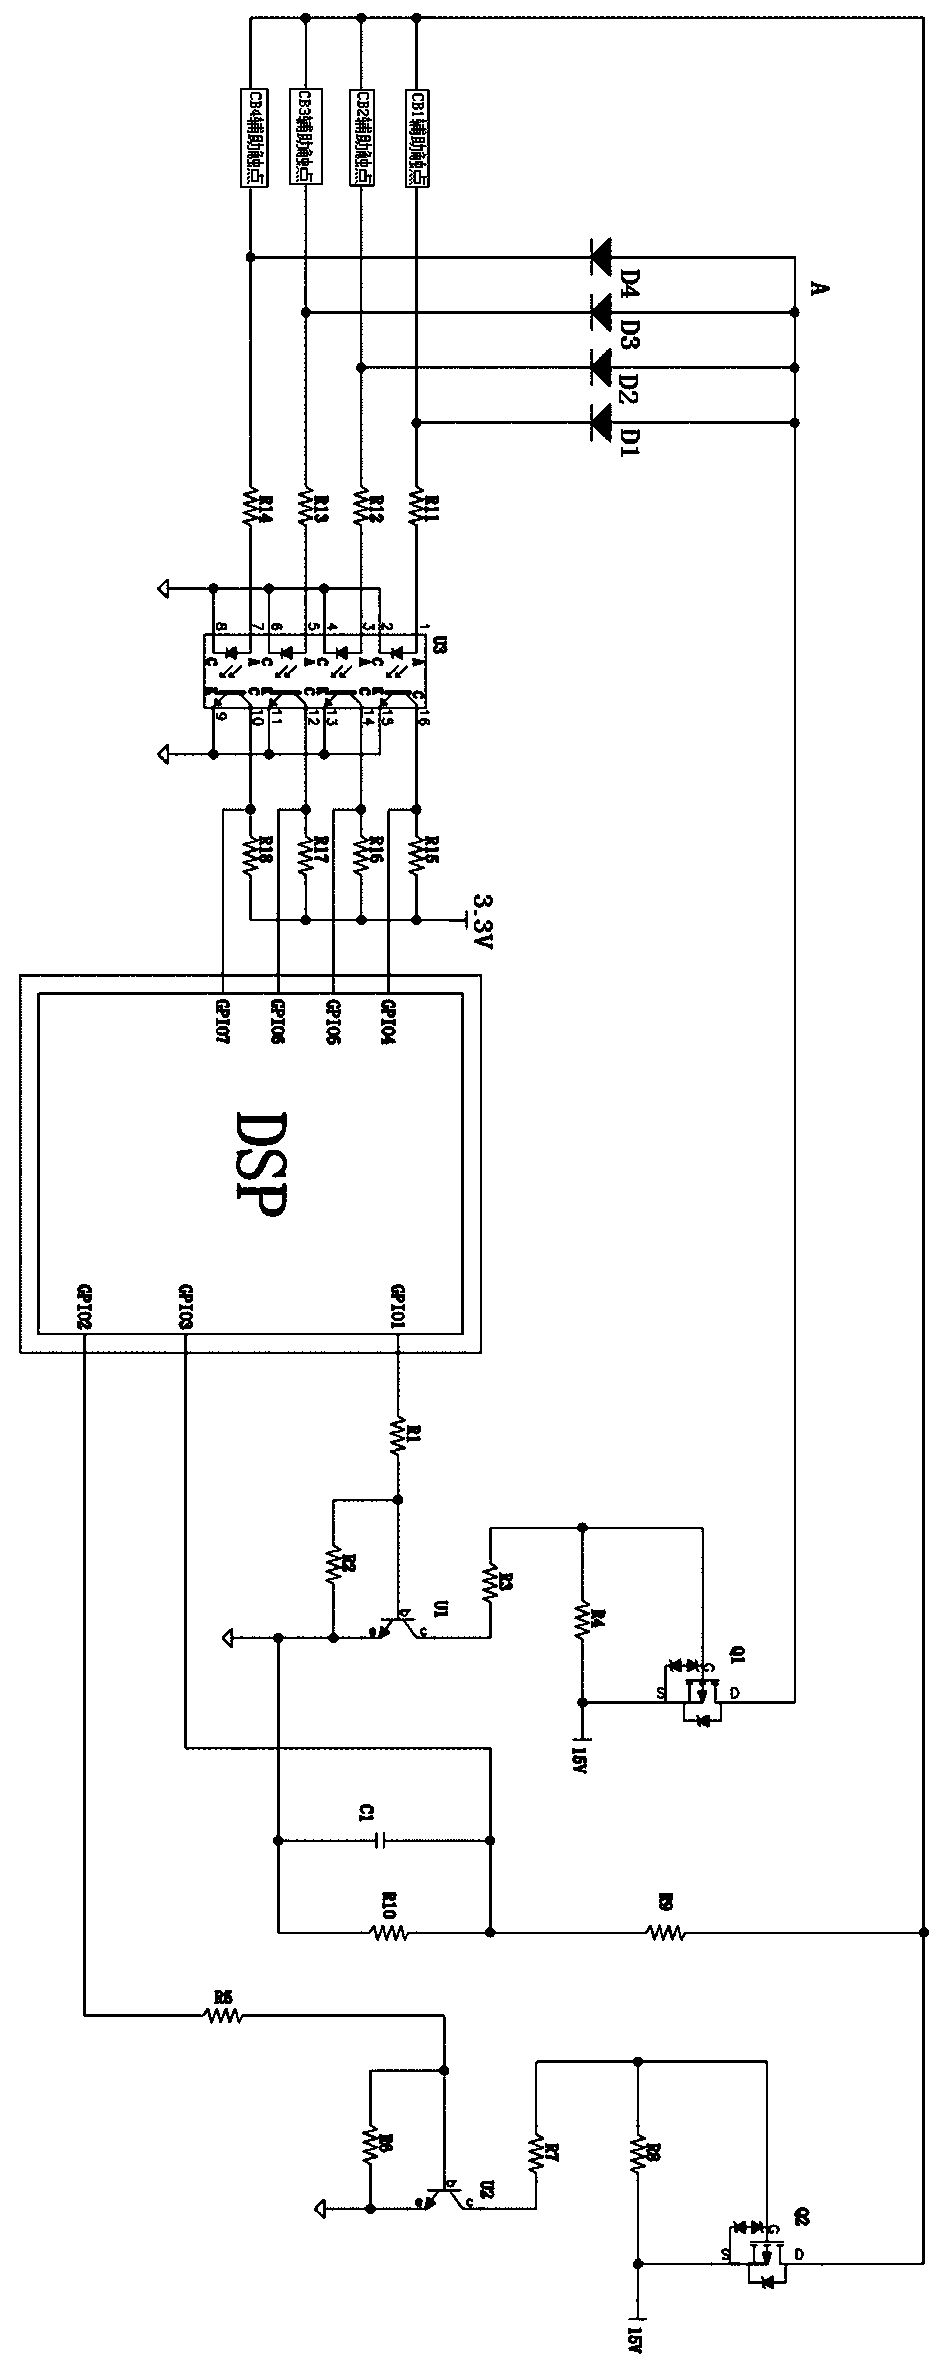 A state monitoring circuit of a circuit breaker with auxiliary contacts